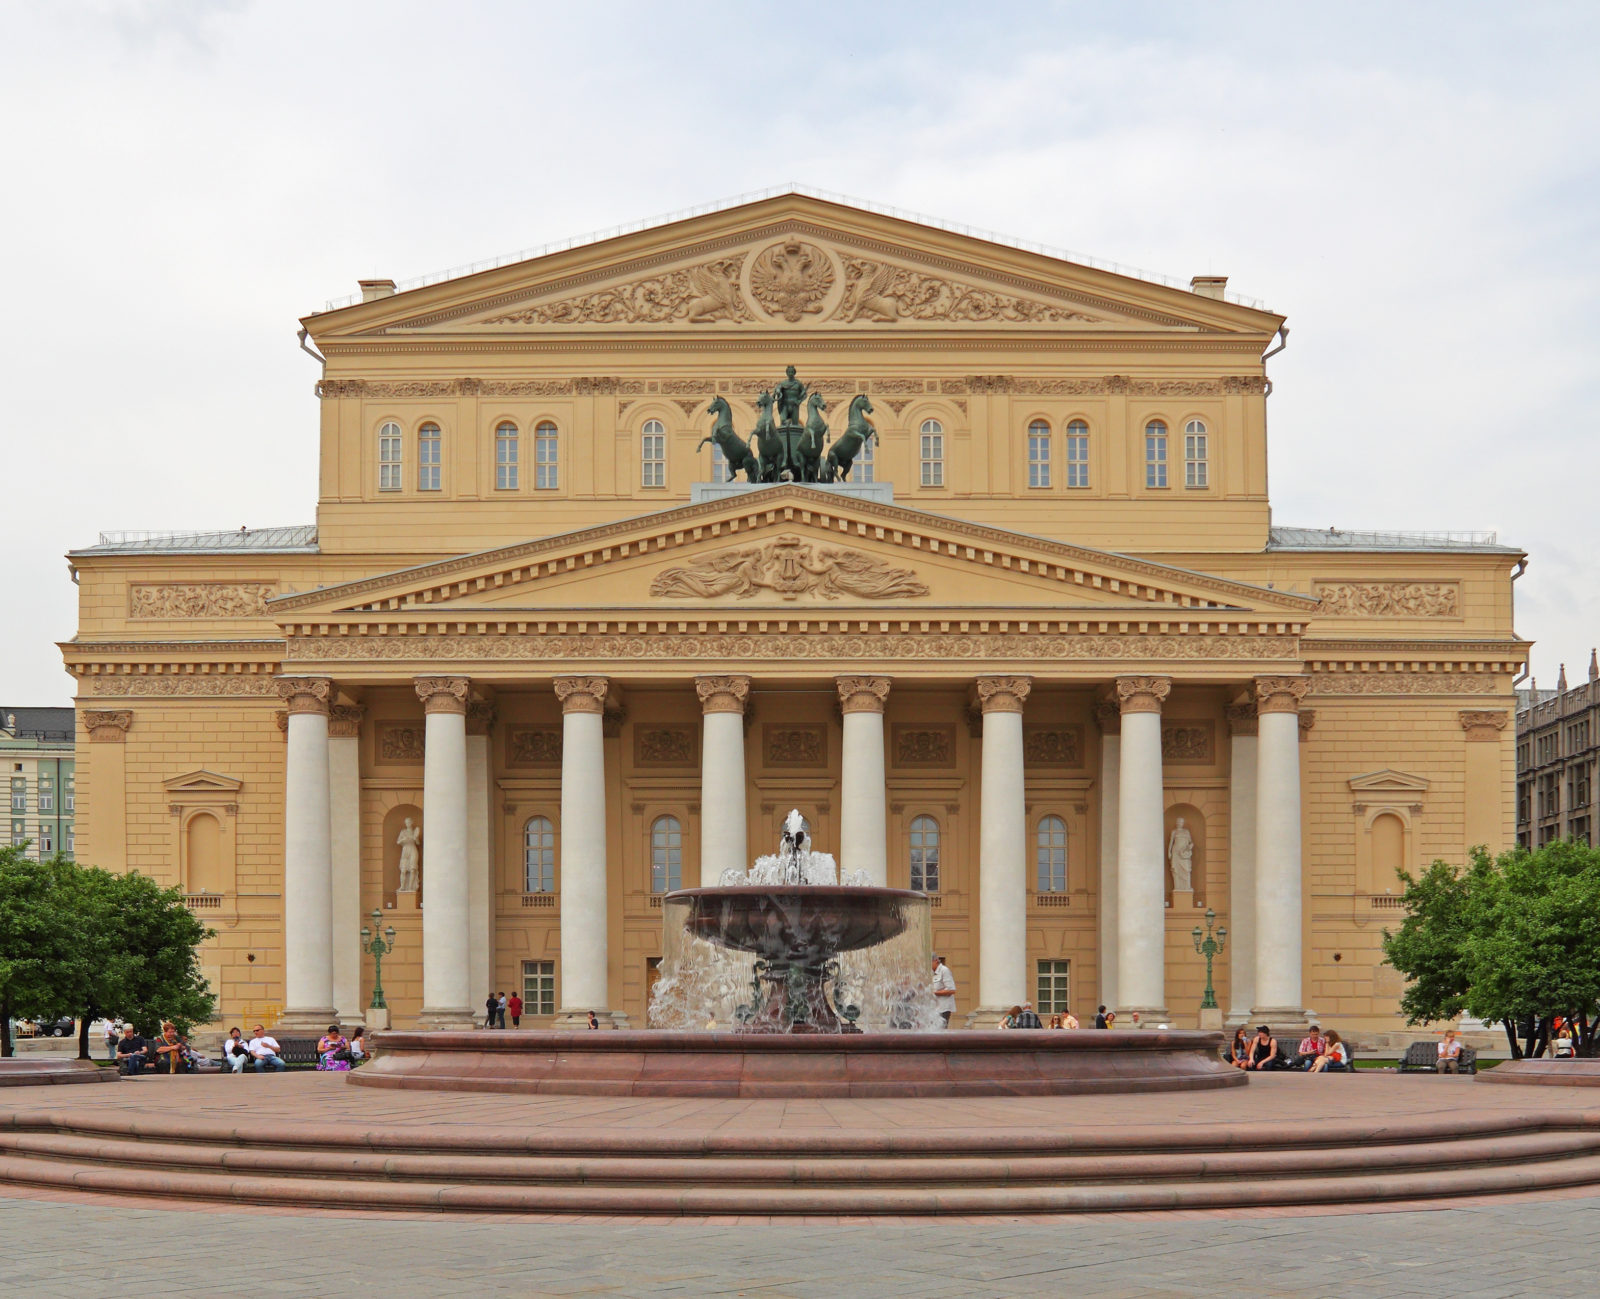 Tours in Moscow, tours in English, tour to Bolshoi, tour to Bolshoi Theater, excursion to Bolshoi Theater, excursions in Moscow, excursions in Moscow in English, Bolshoi Back Stage tour, visit to the Bolshoi Theater, visit to Bolshoi in a small group, English speaking guide, guide in Moscow, tours in English, theatre tour, tour to the theatre, unusual tours, popular tours, traditional tours, theater tours, theatre focused tours, excursions to the theatre, back stage tours, backstage excursions, excursions to the backstage, Bolshoi tours, Bolshoi visits, tickets to the theatre, tickets to the Bolshoi theatre, tickets to the Bolshoi